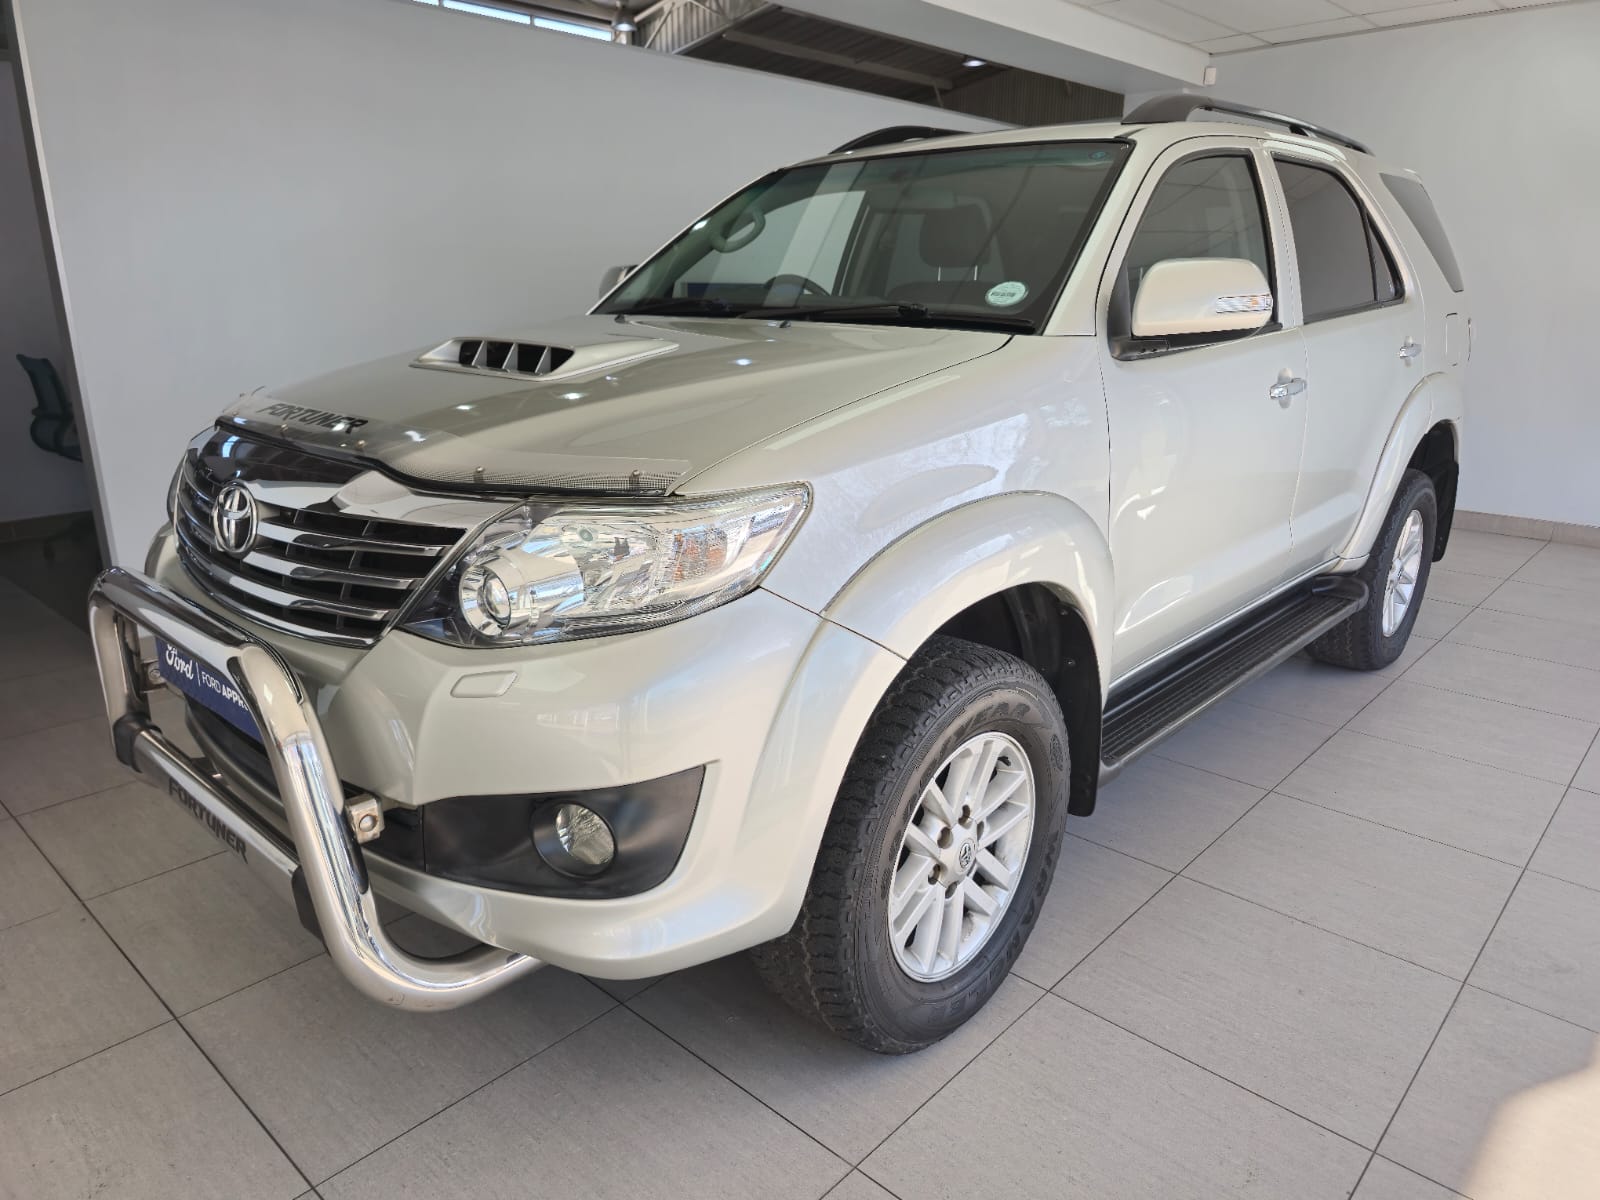 2014 Toyota Fortuner  for sale - UH70470